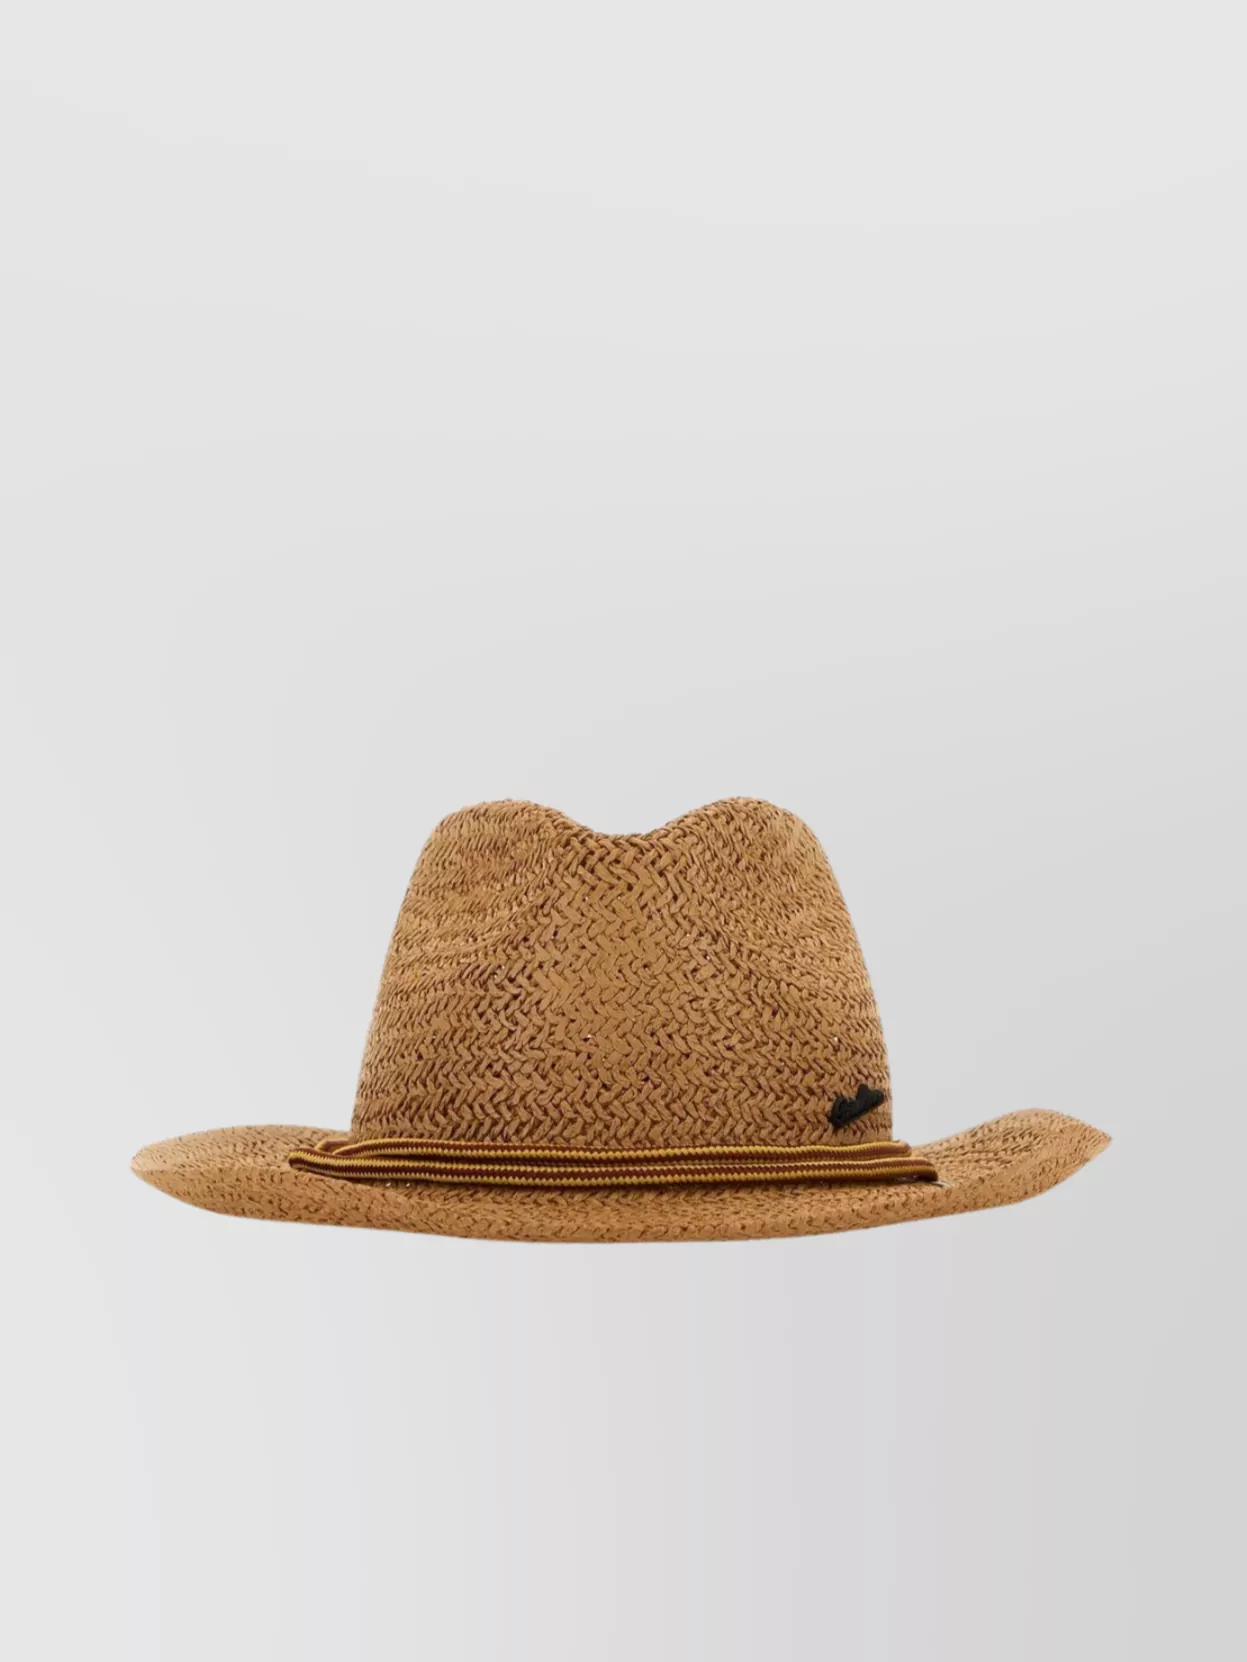 Shop Borsalino Sun Hat With Wide Brim And Woven Texture